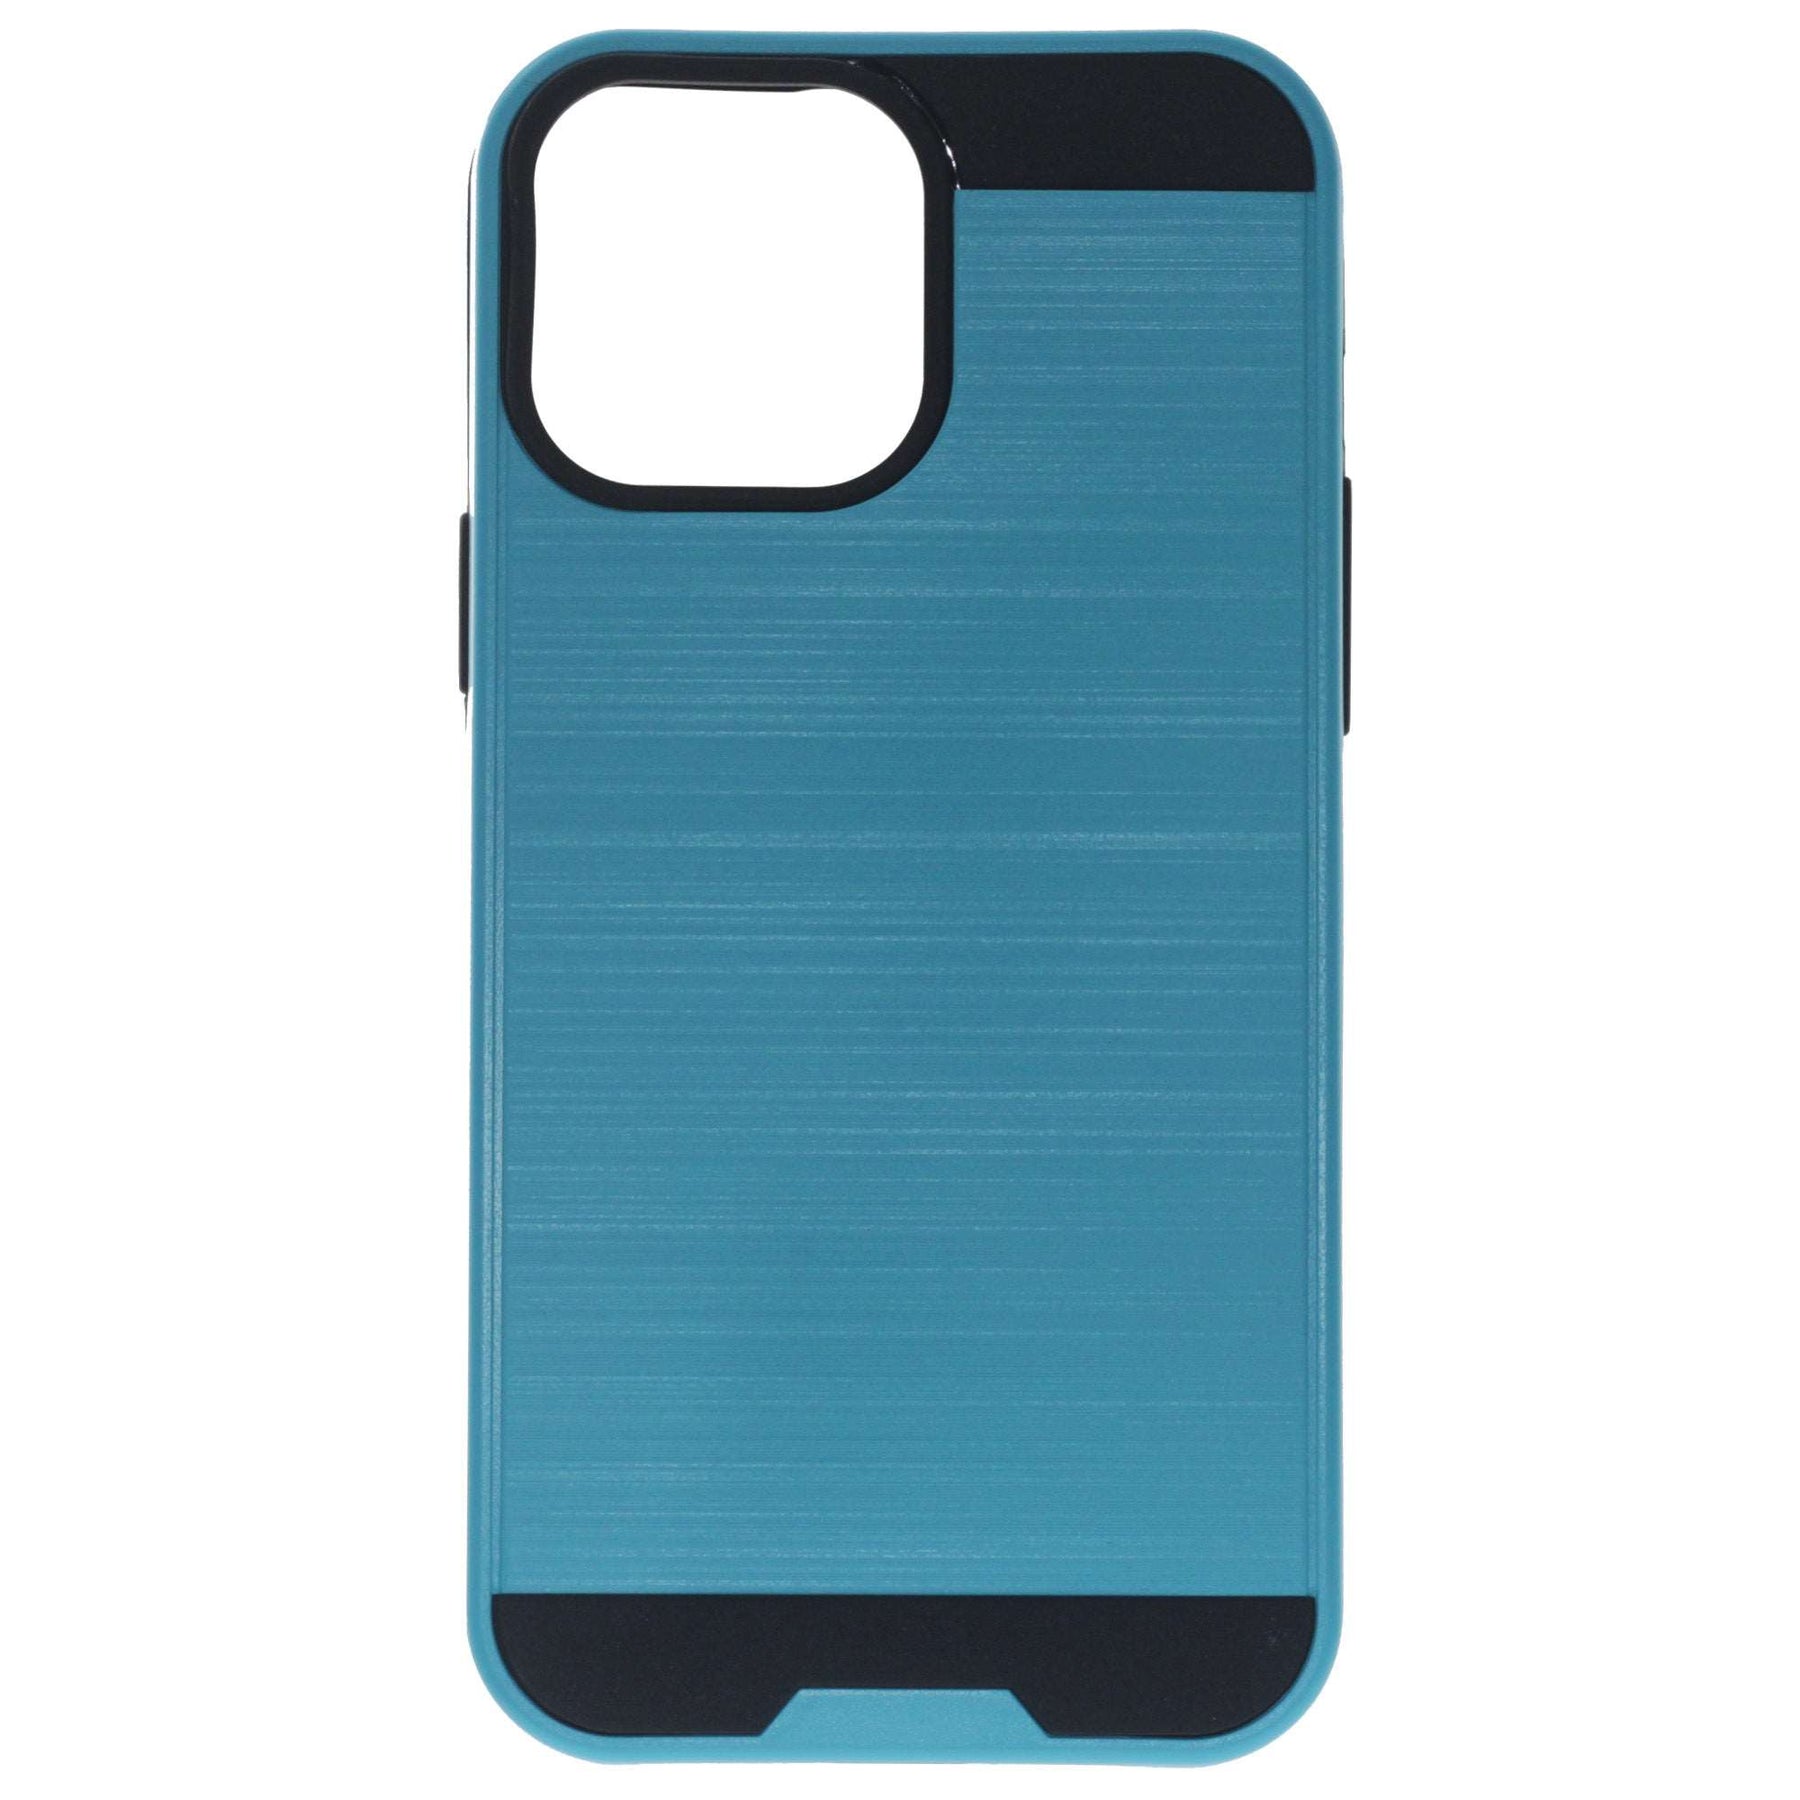 iPhone 13 Pro Max teal case